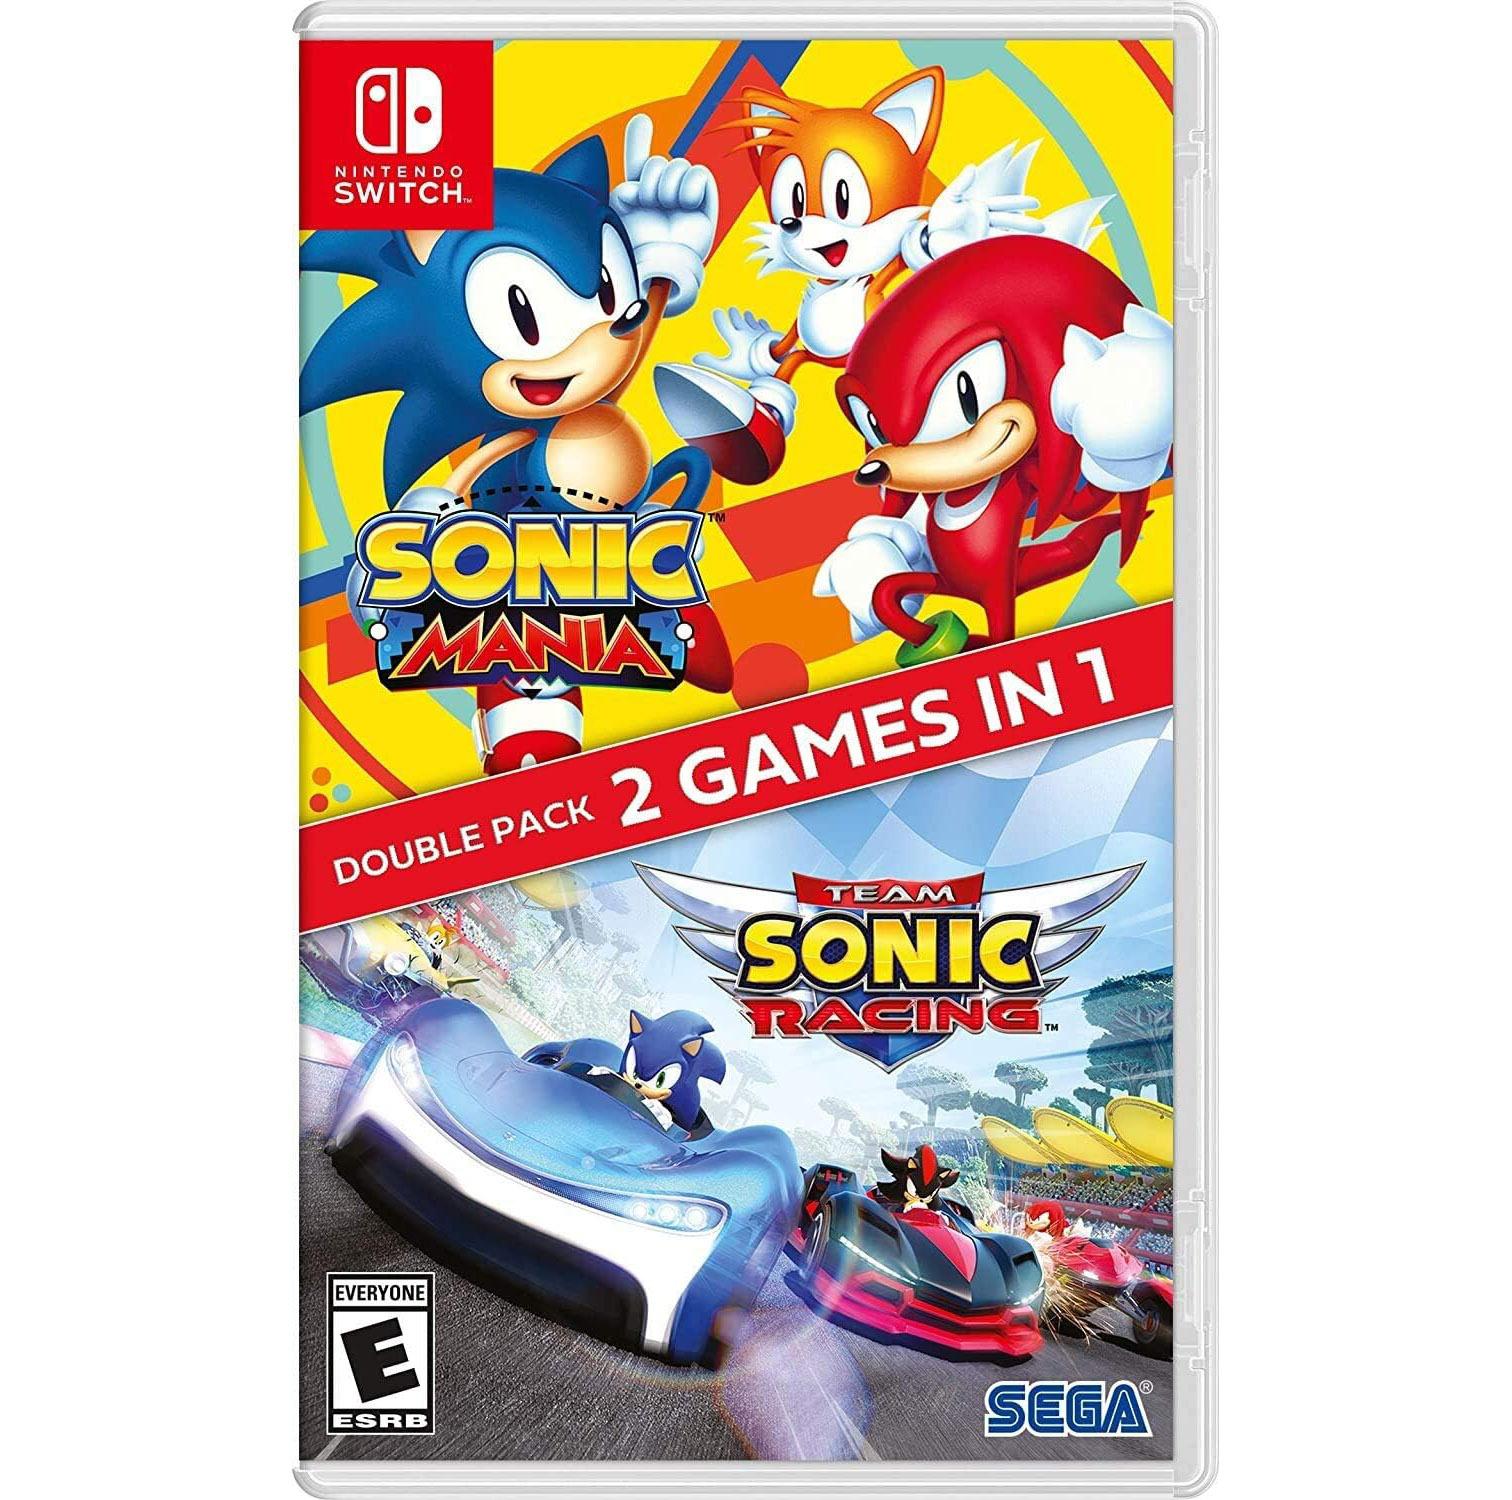 Sonic Mania + Team Sonic Racing Double Pack Nintendo Switch for $20